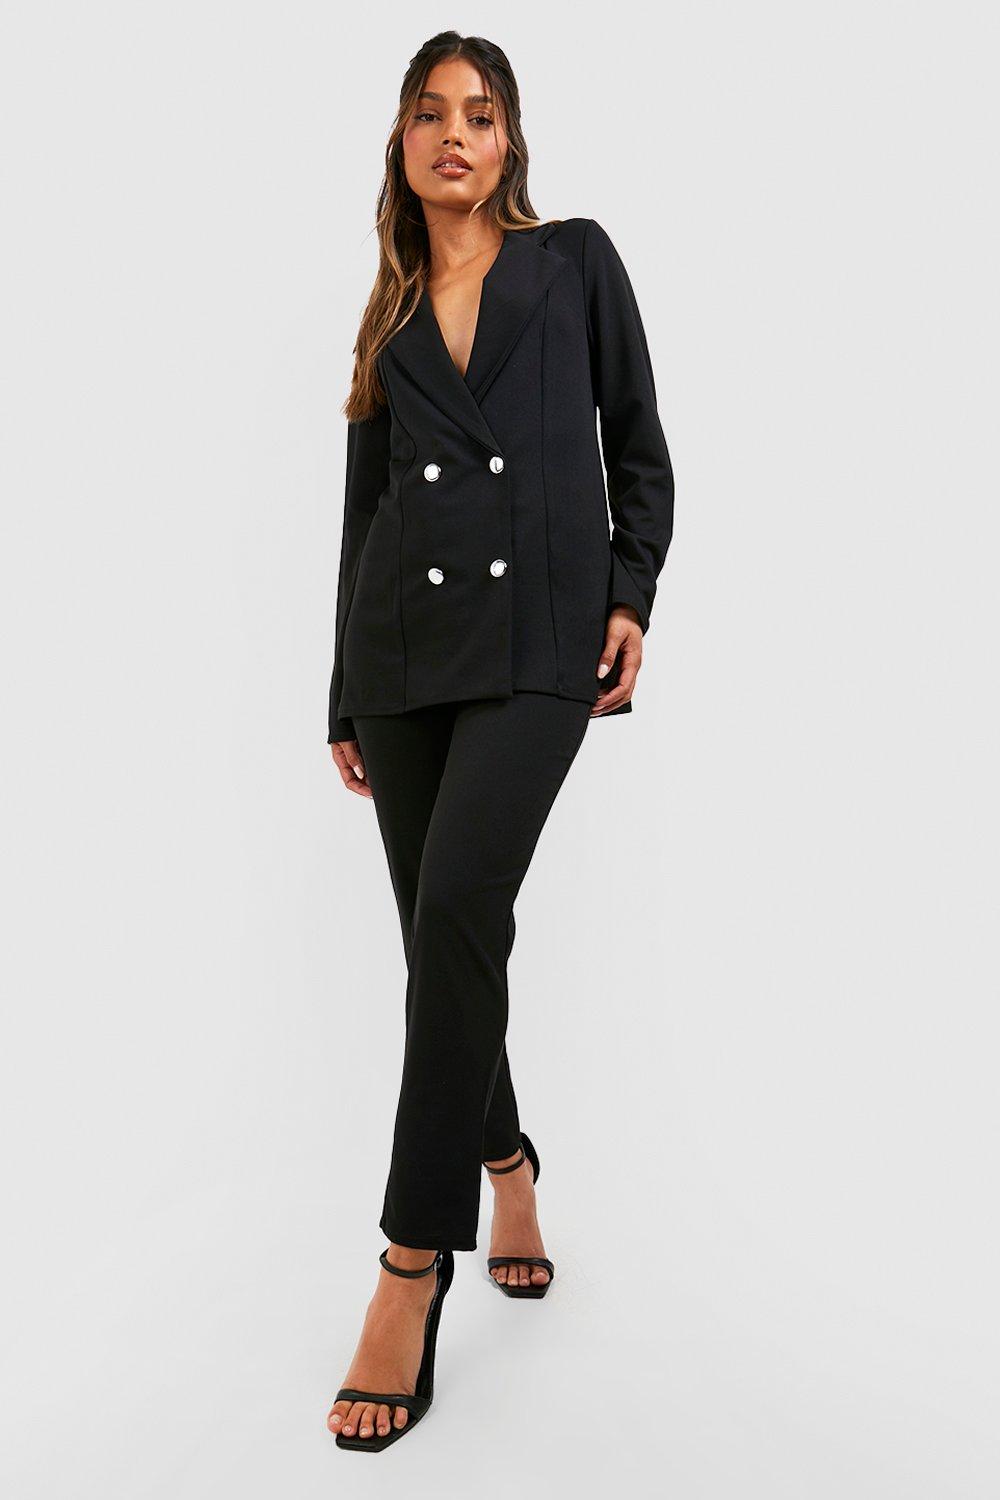 boohoo Women's Jersey Double Breasted Blazer And Trouser Suit Set|Size: 10|black